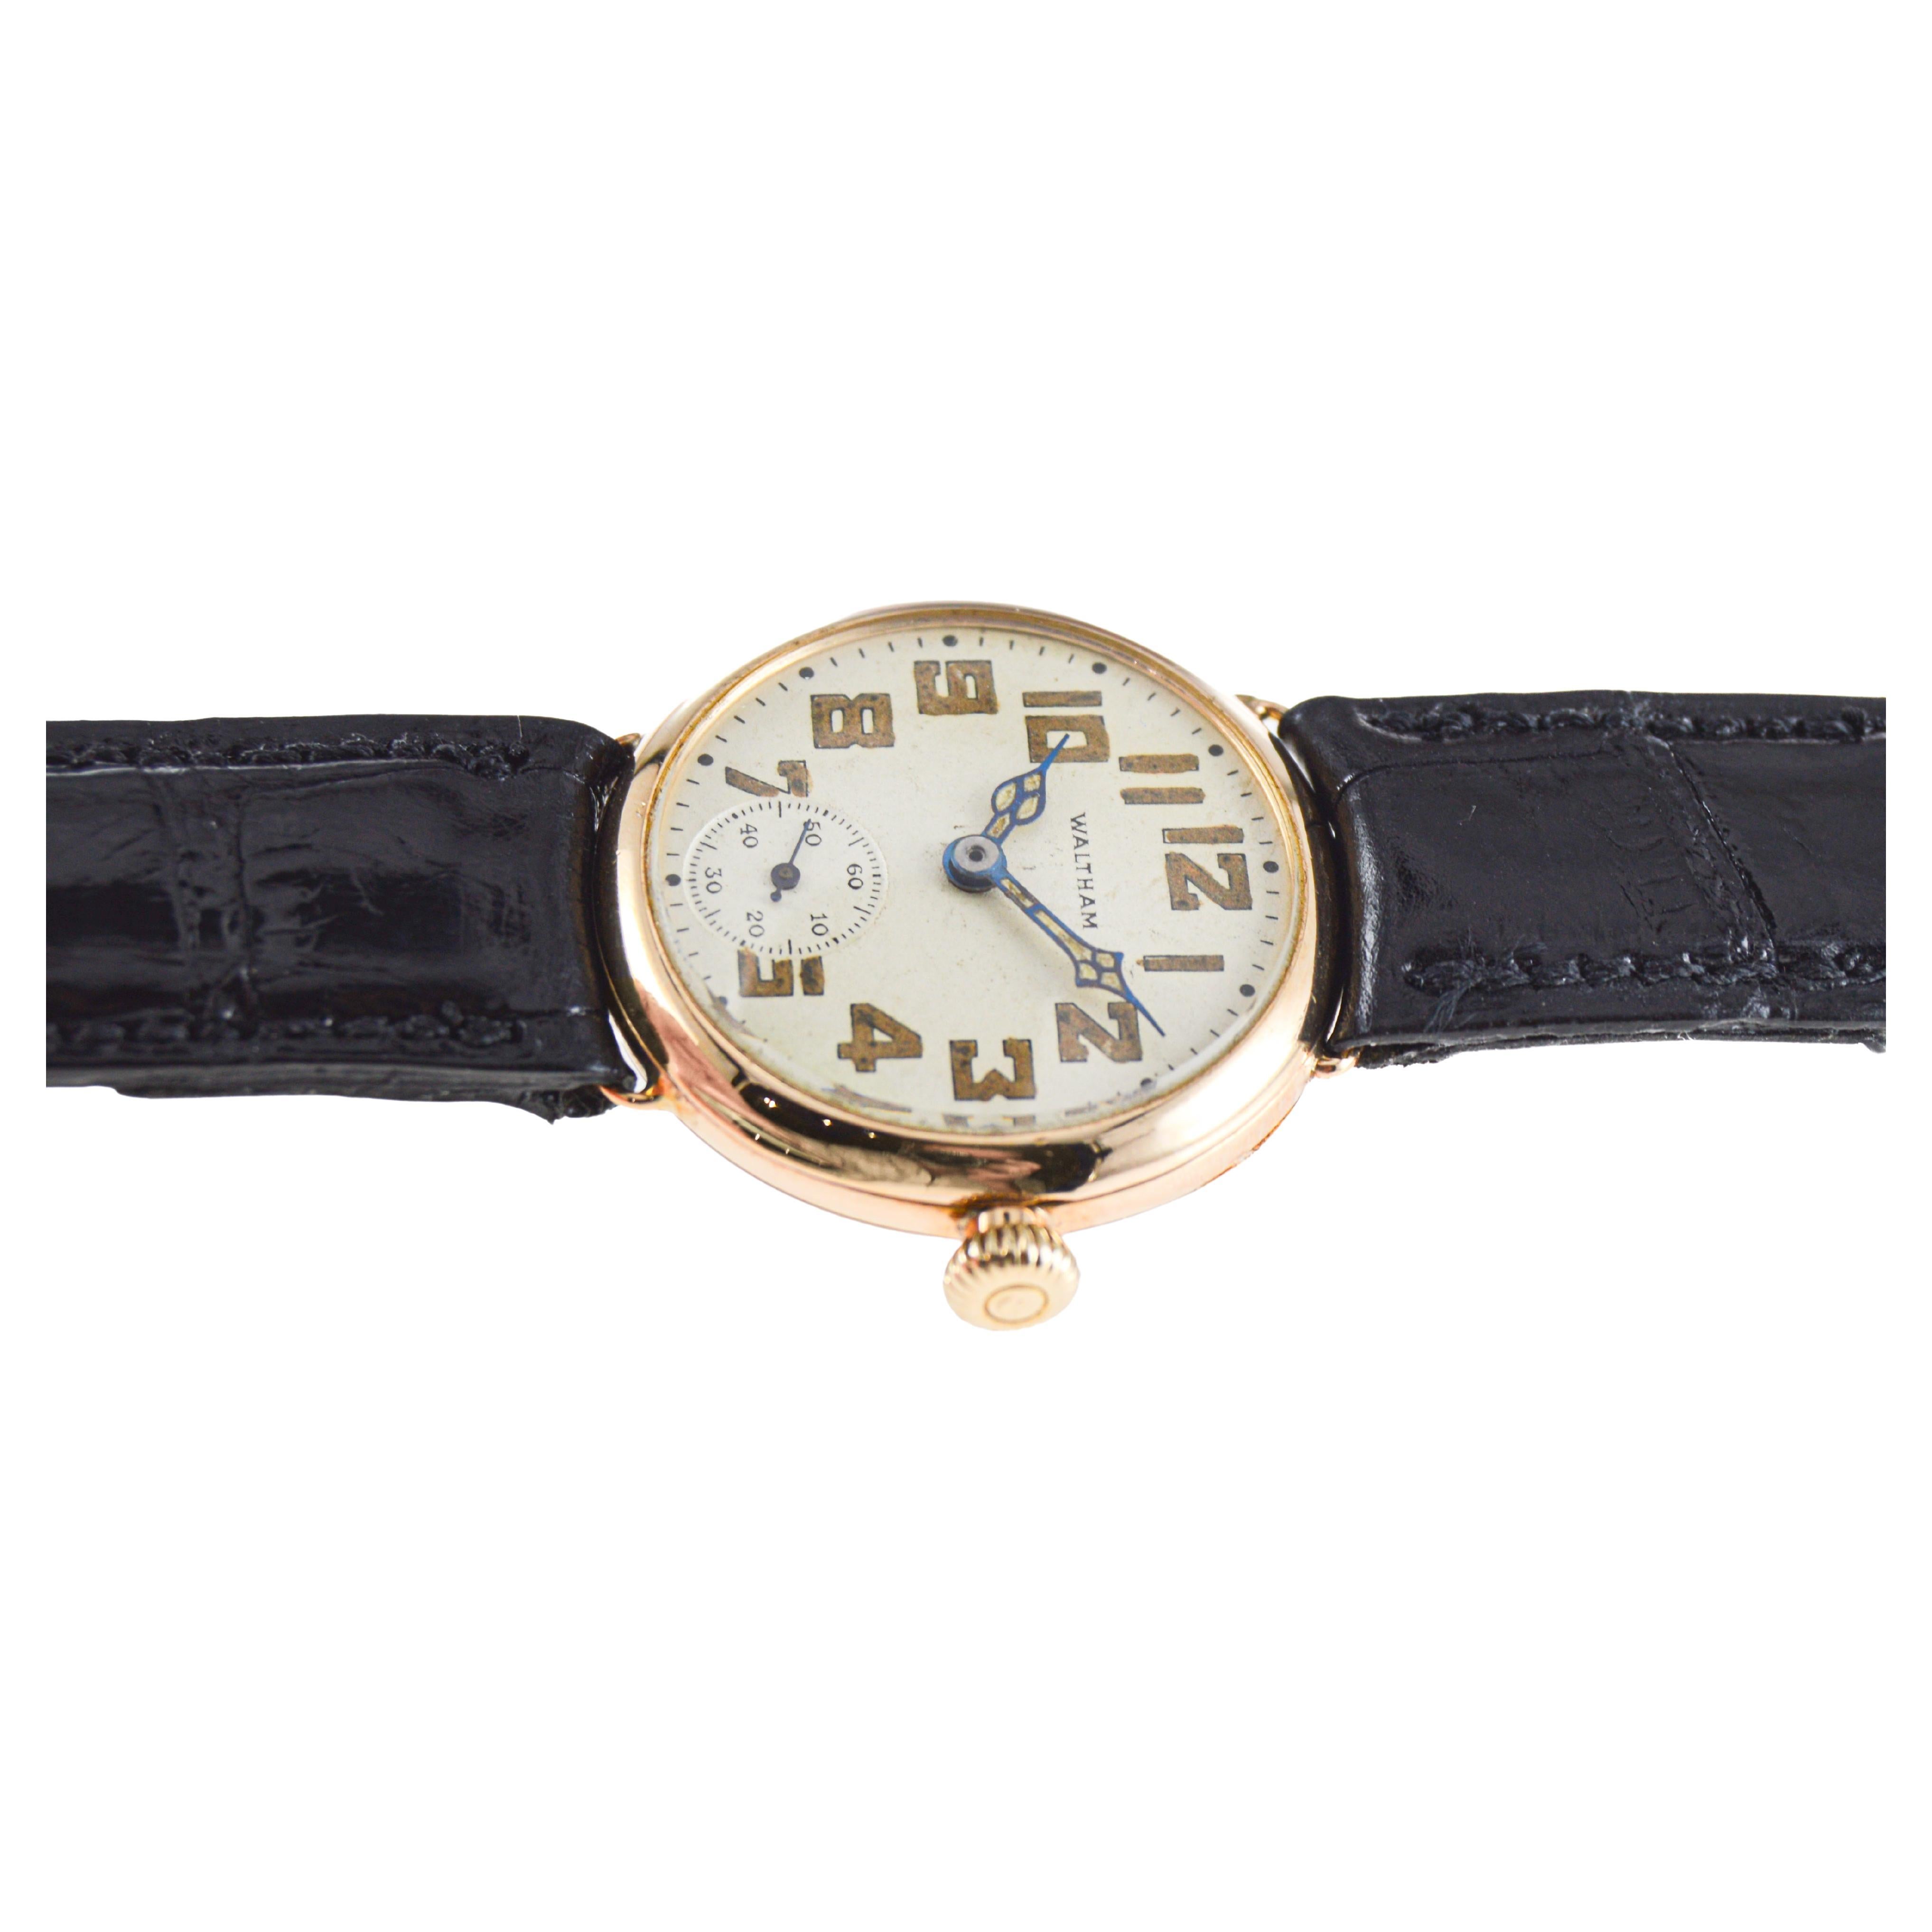 Waltham 14Kt. Solid Gold Art Deco Watch with Original Dial from 1910  For Sale 2